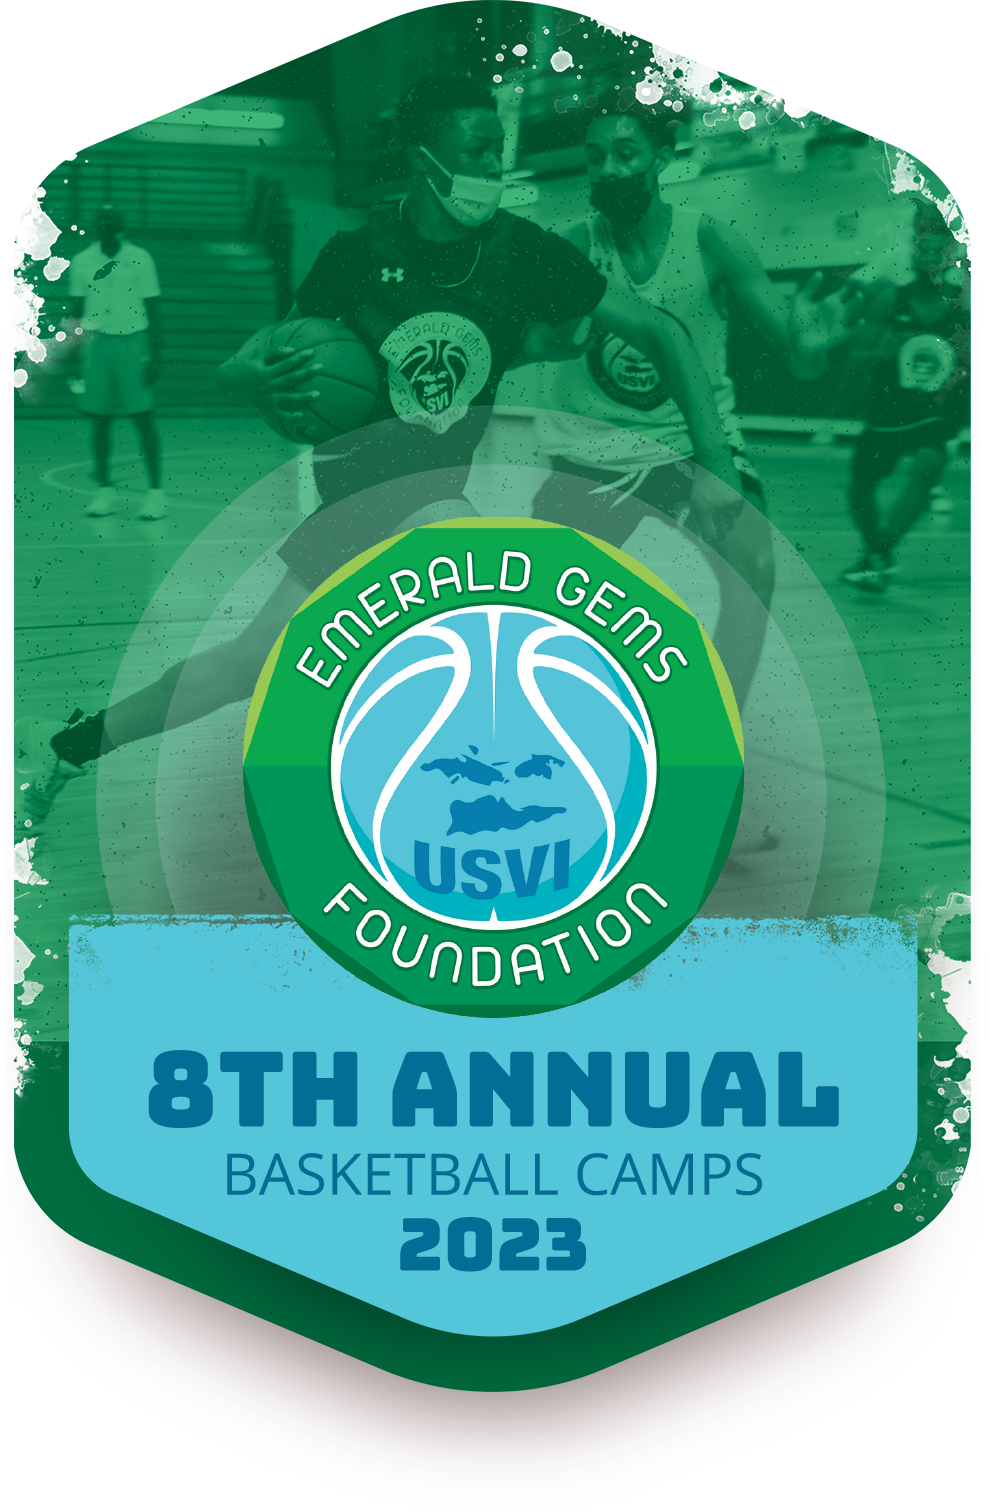 2023 Camps coming soon!